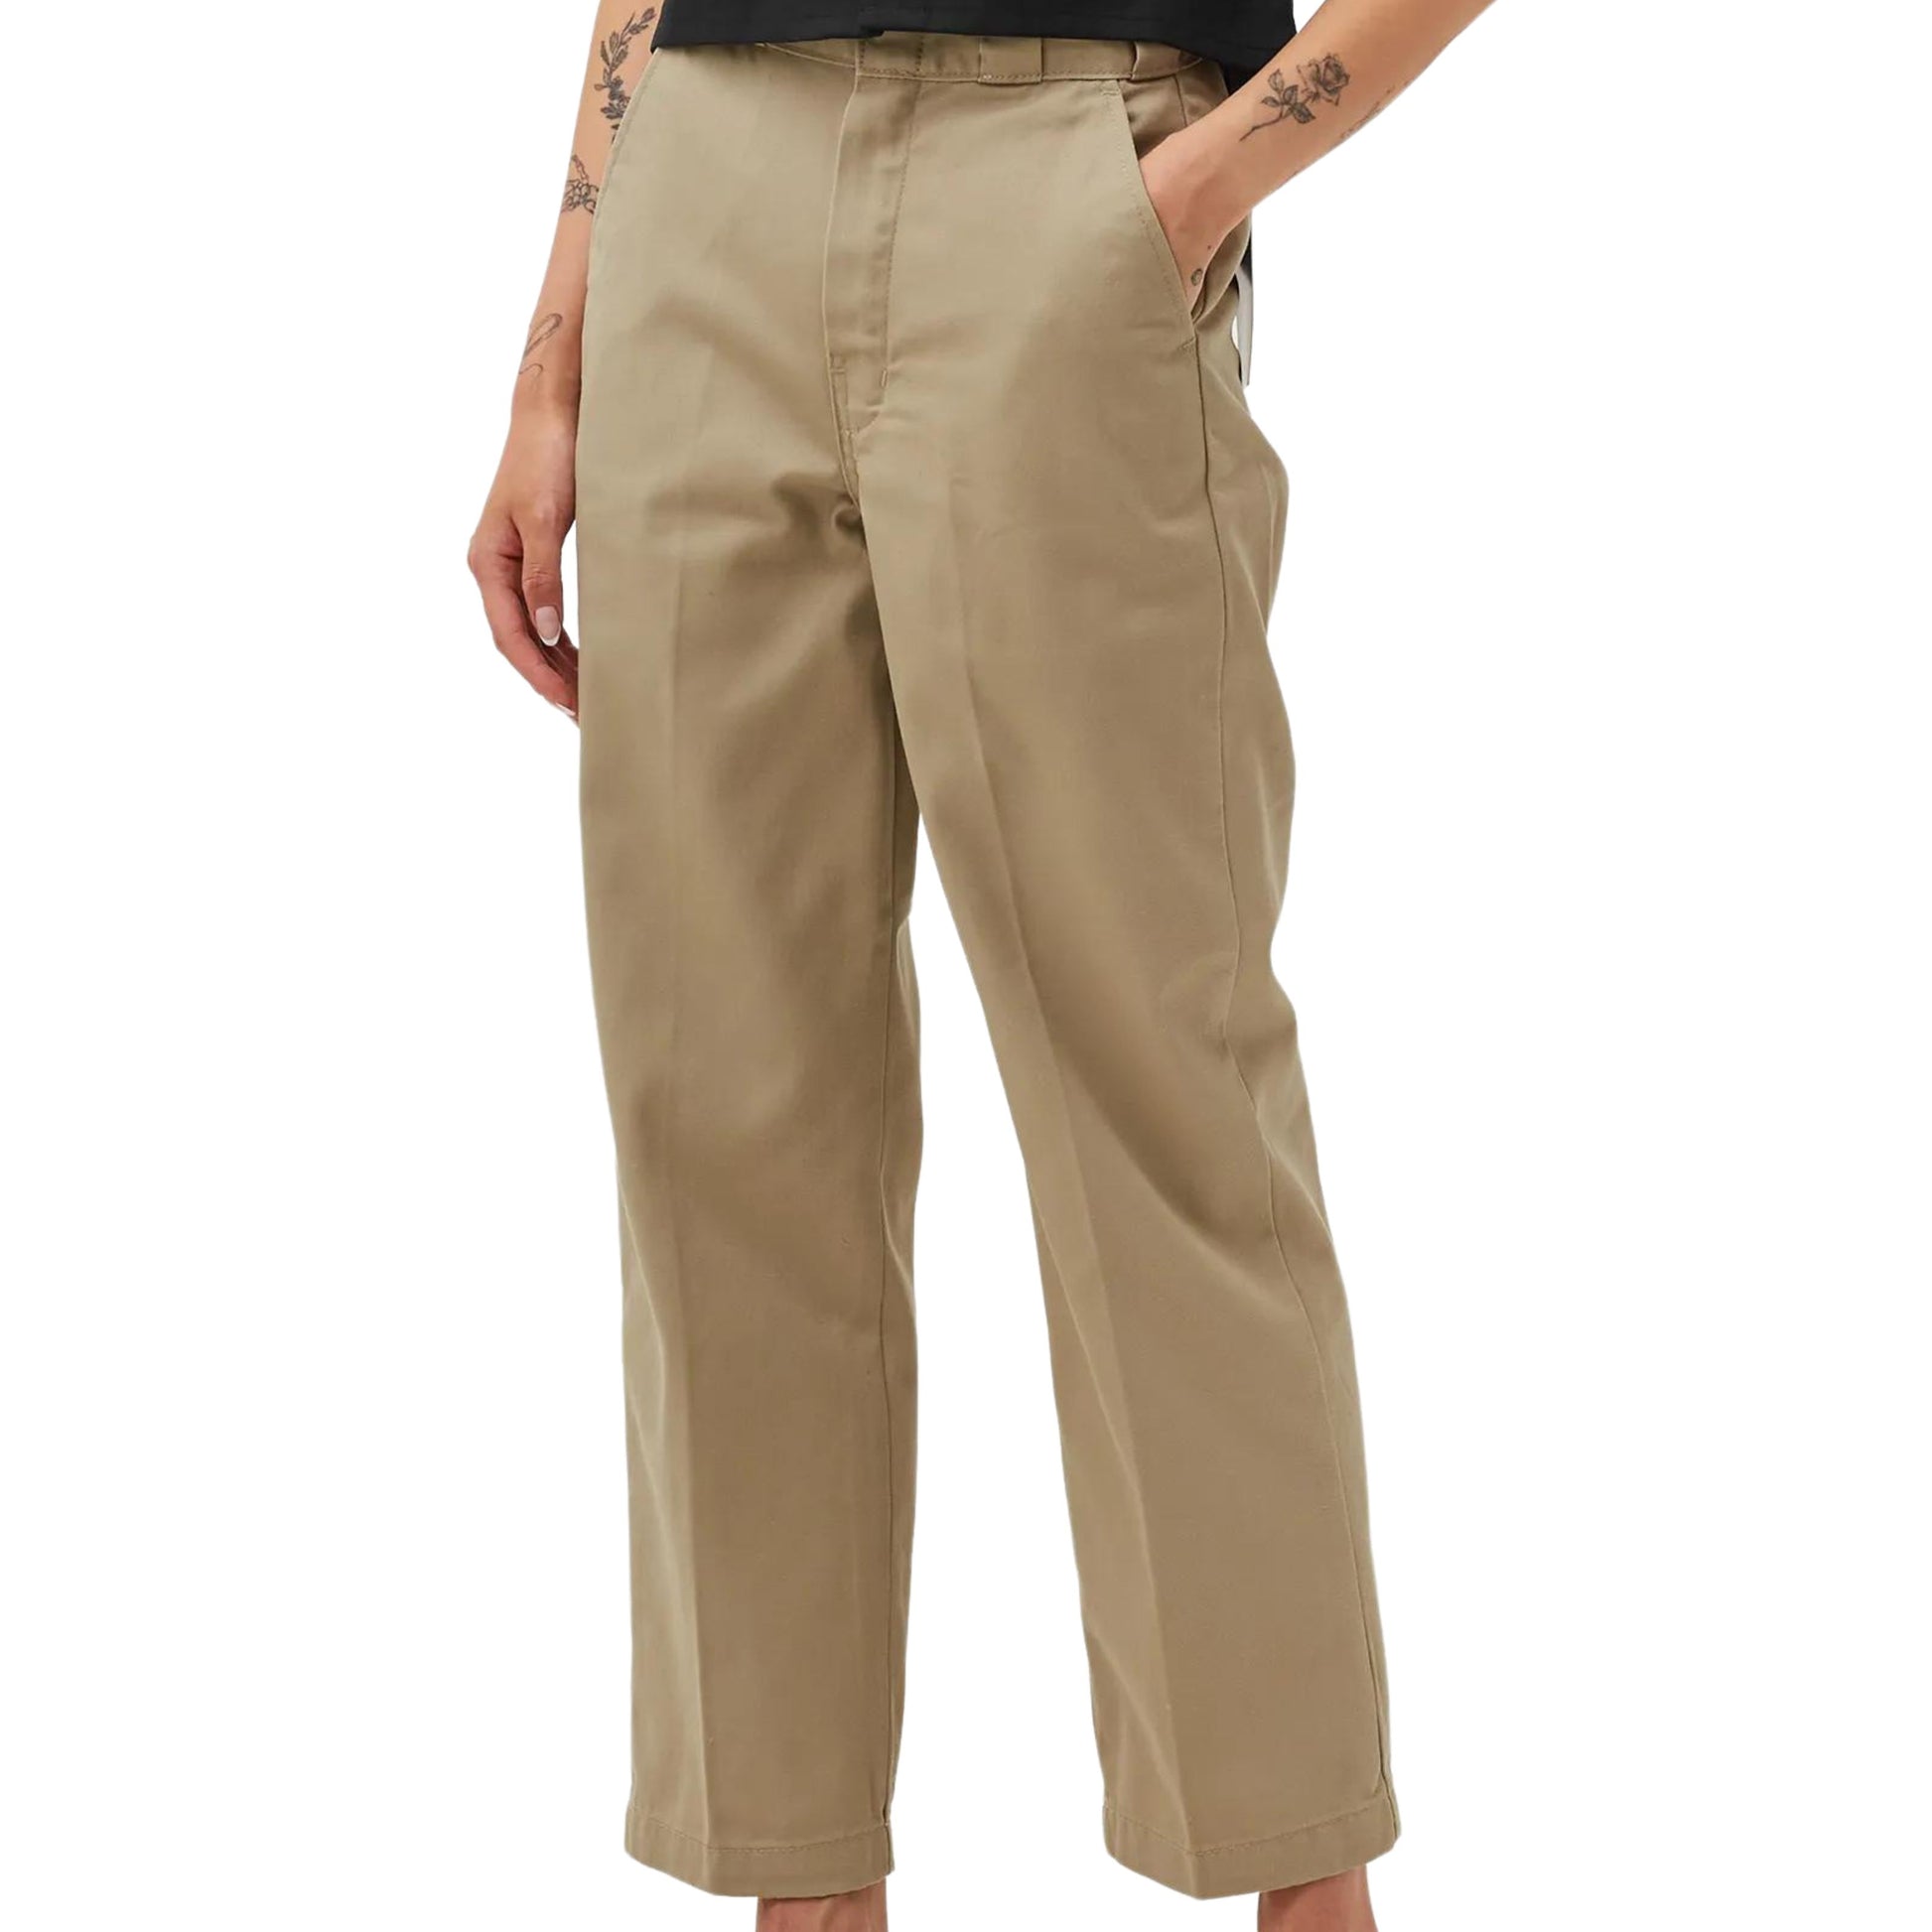 Elizaville Rec Pant – Day by day